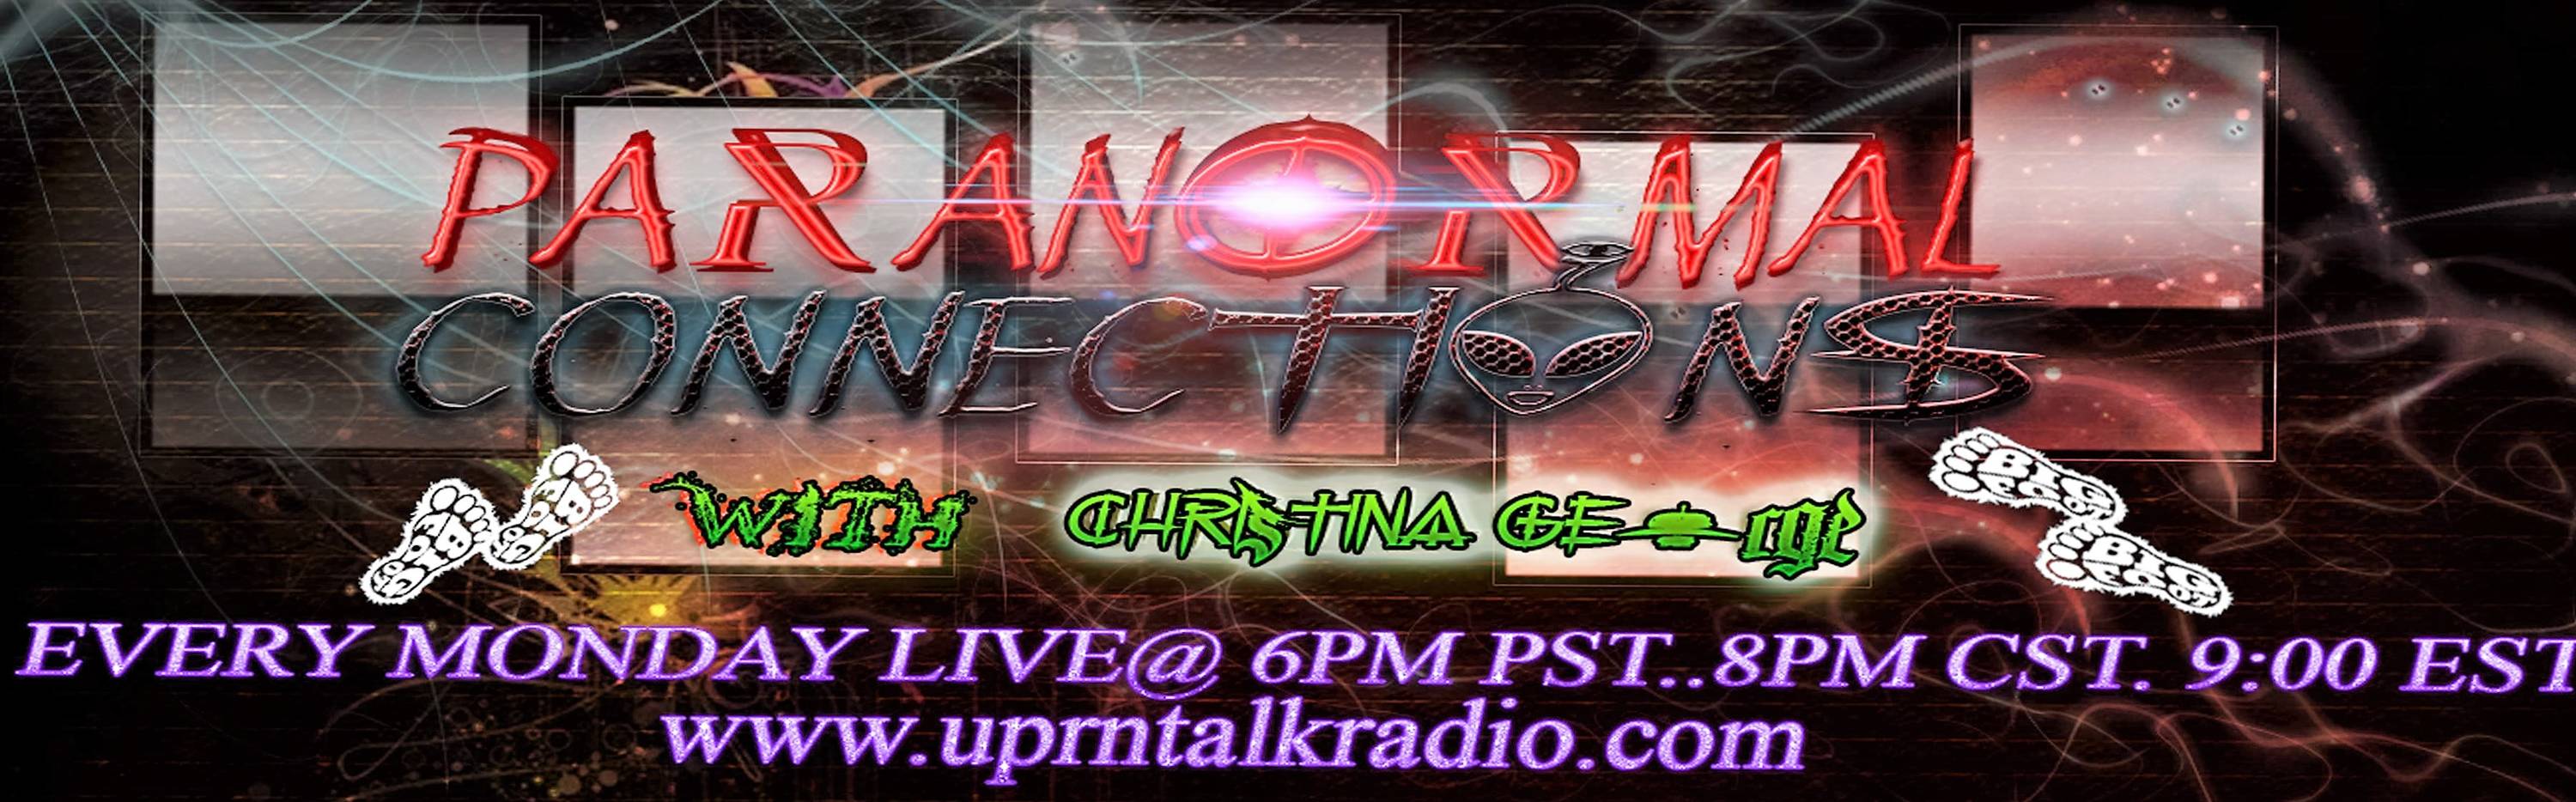 Paranormal Connections Radio Show LIVE TONIGHT @ 6:10pm pst...9:10pm est